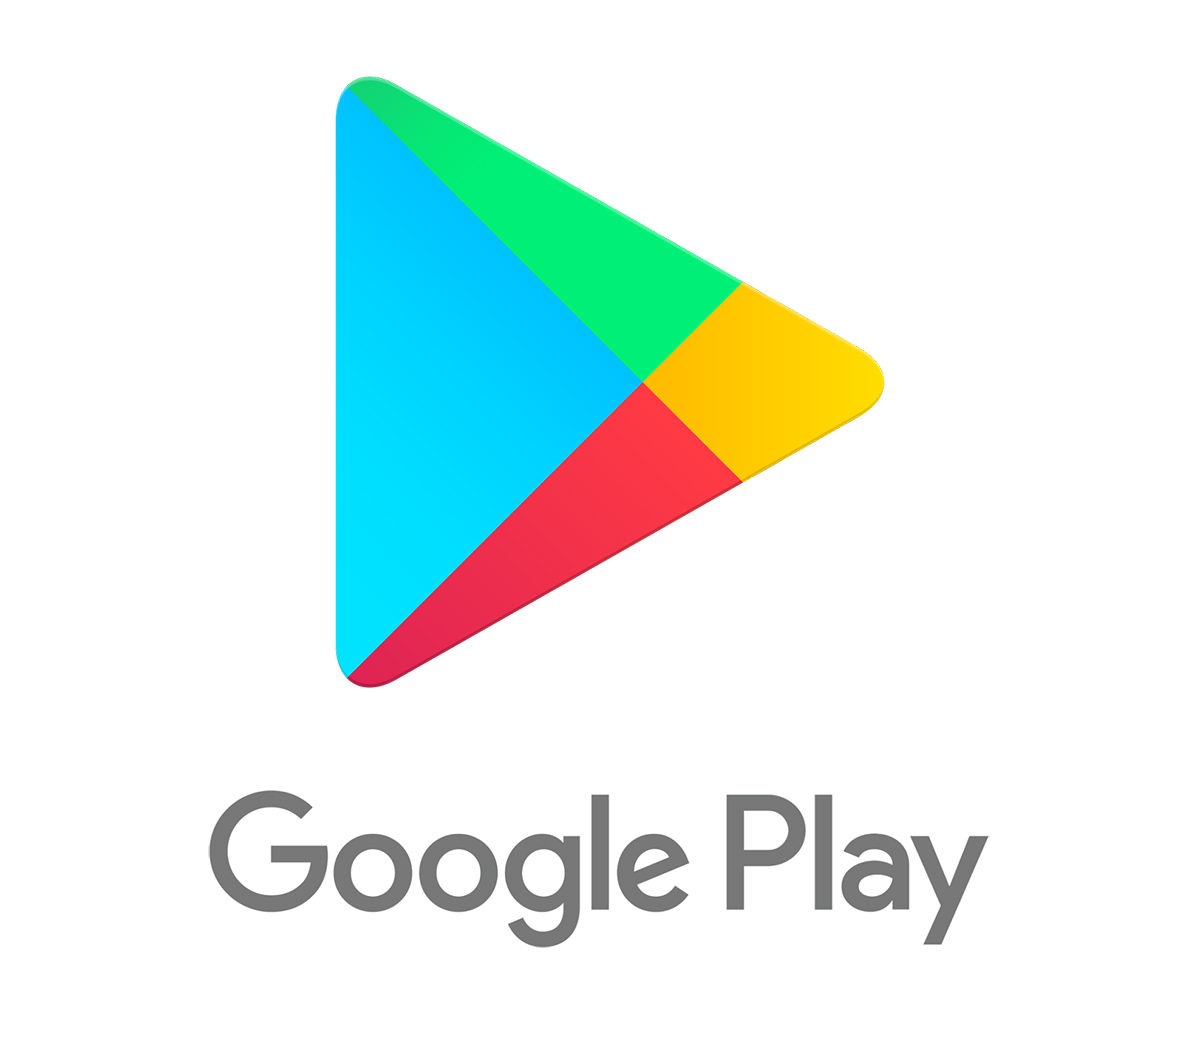 7games android 7.0 apk